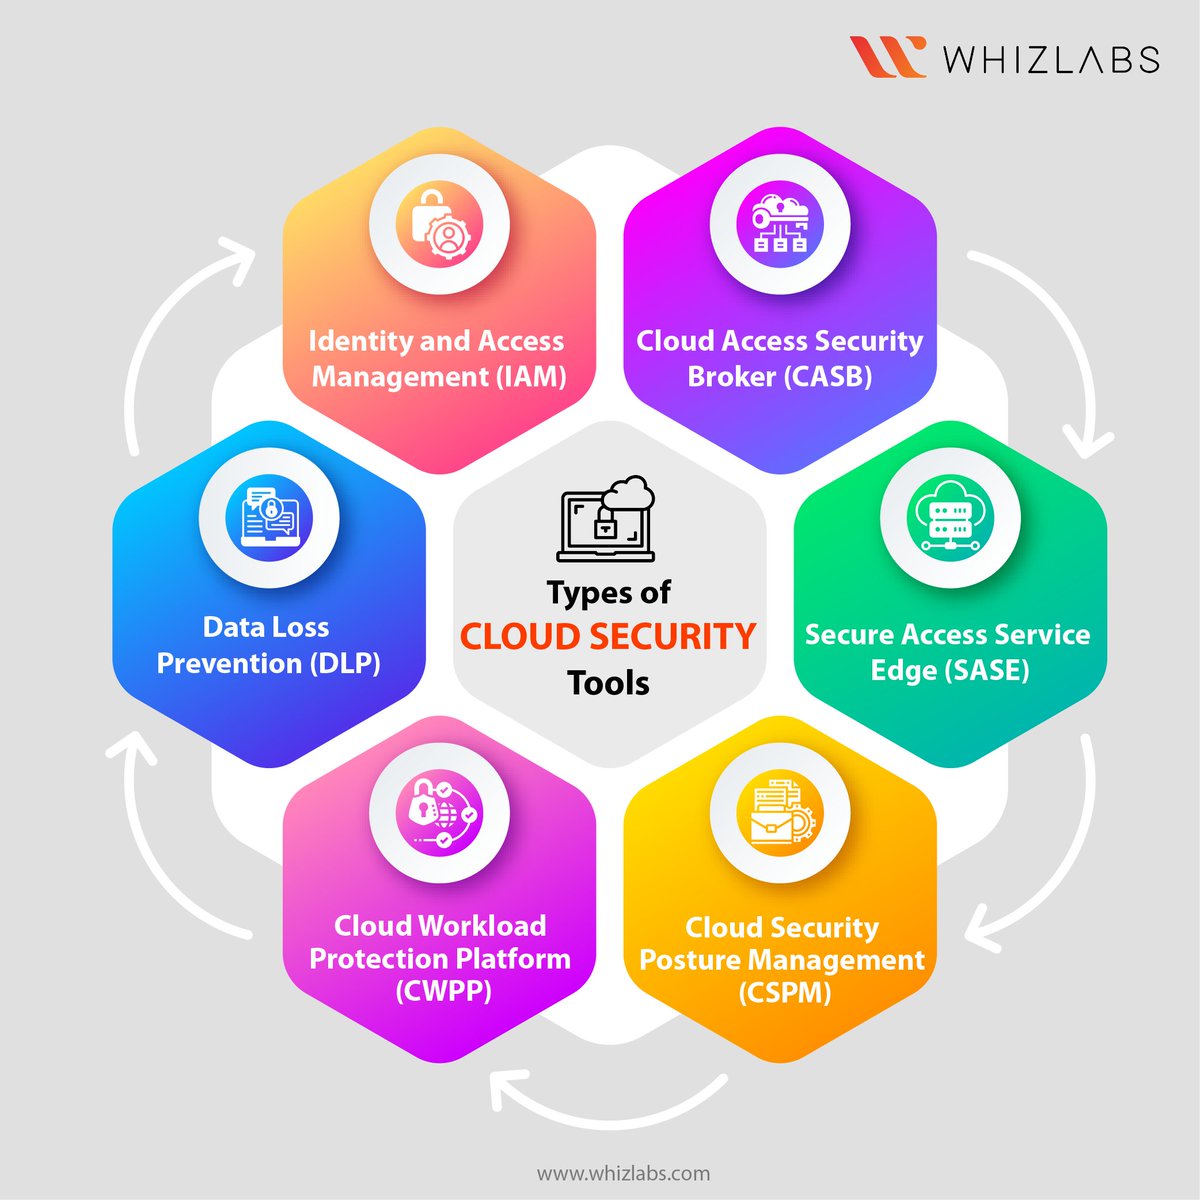 💼Secure Your Cloud Journey: Essential Security Tools You Need to Know🛡️ Explore Whizlabs to access expert-led training, certification resources - whizlabs.com #cloudsecurity #cybersecurity #dataprotection #cloudcomputing #IAM #CASB #SASE #CSPM #CWPP #DLP #Whizlabs